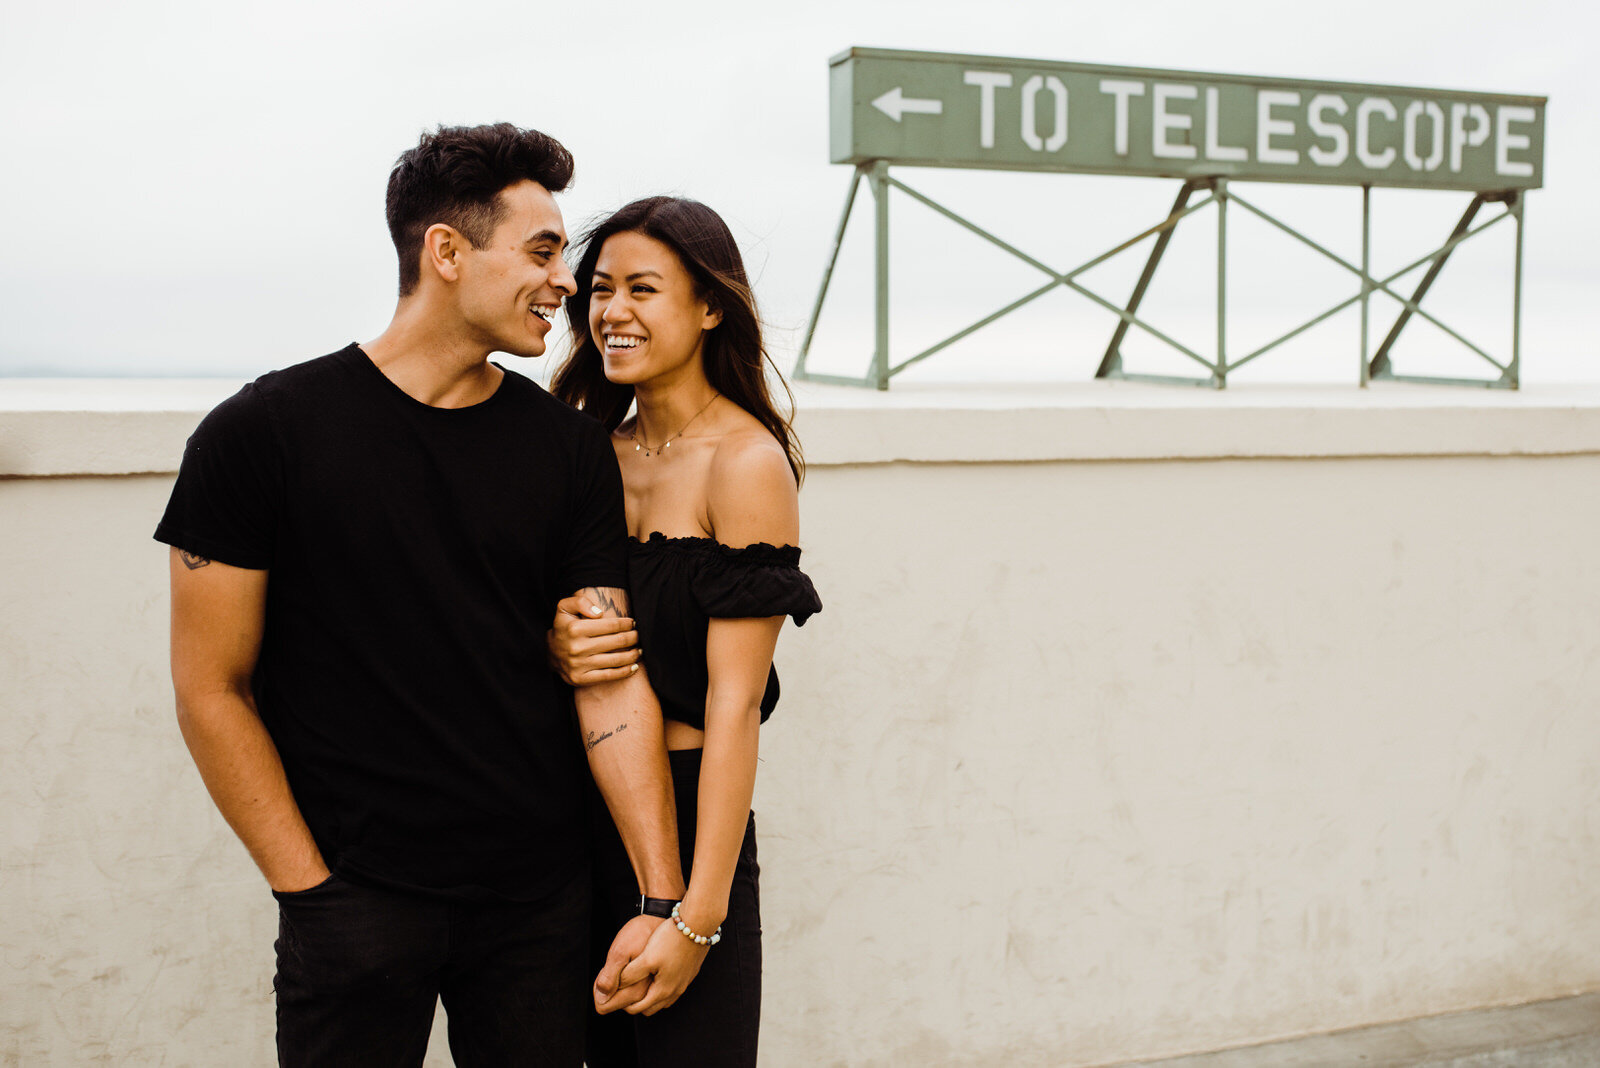 Couple in black at Griffith Telescope